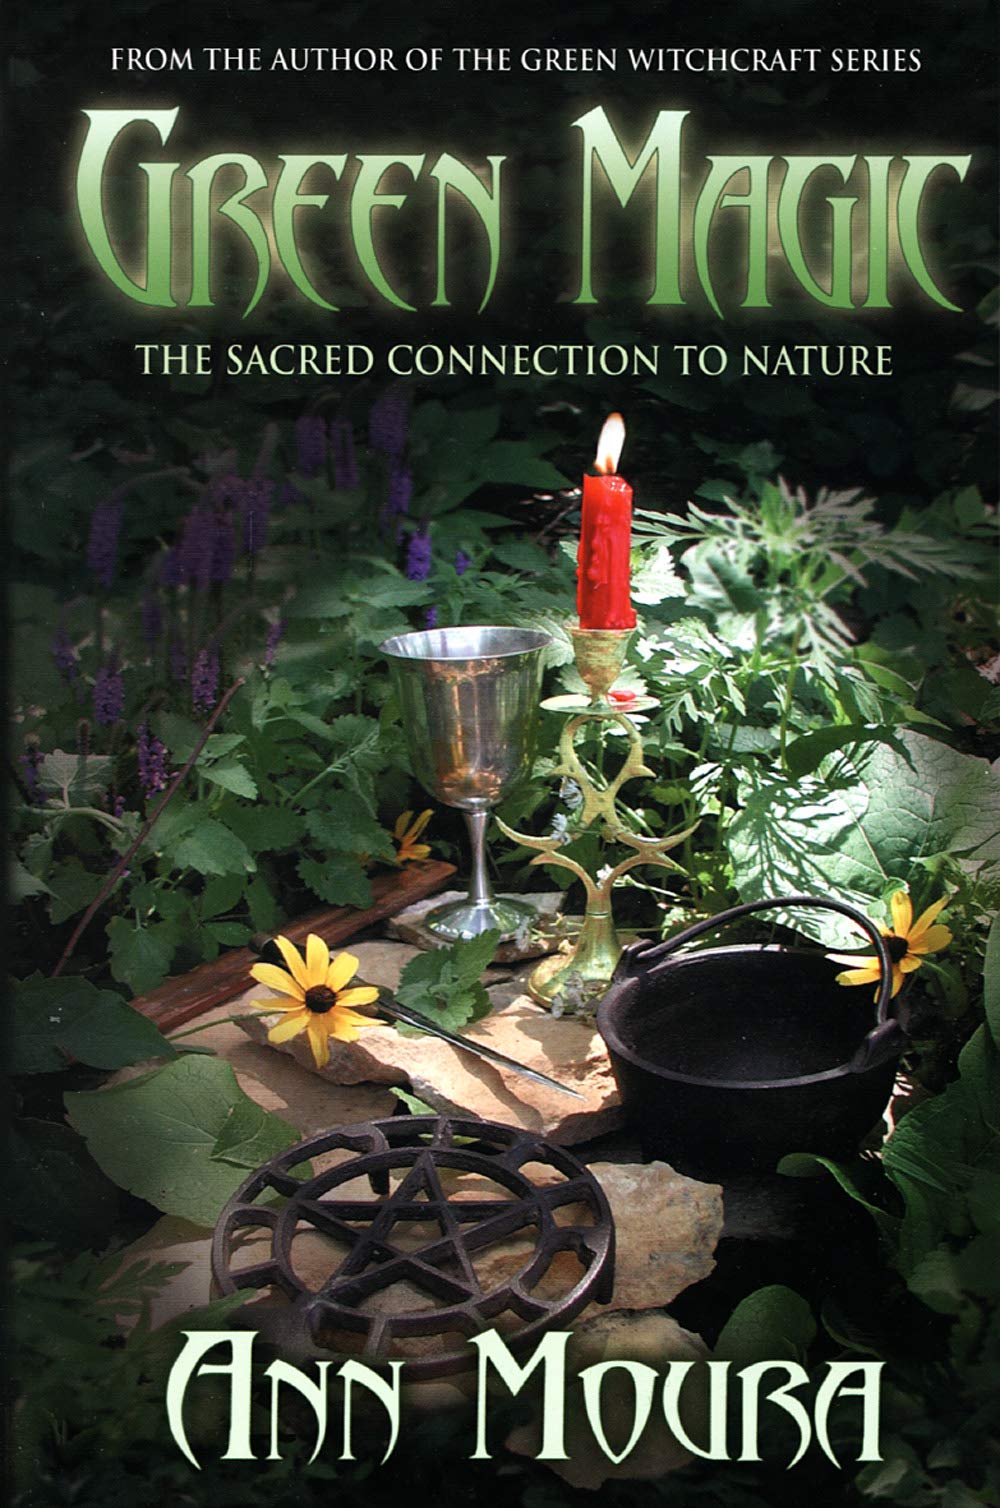 Green Magic: The Sacred Connection to Nature (Green Witchcraft Series, 4)